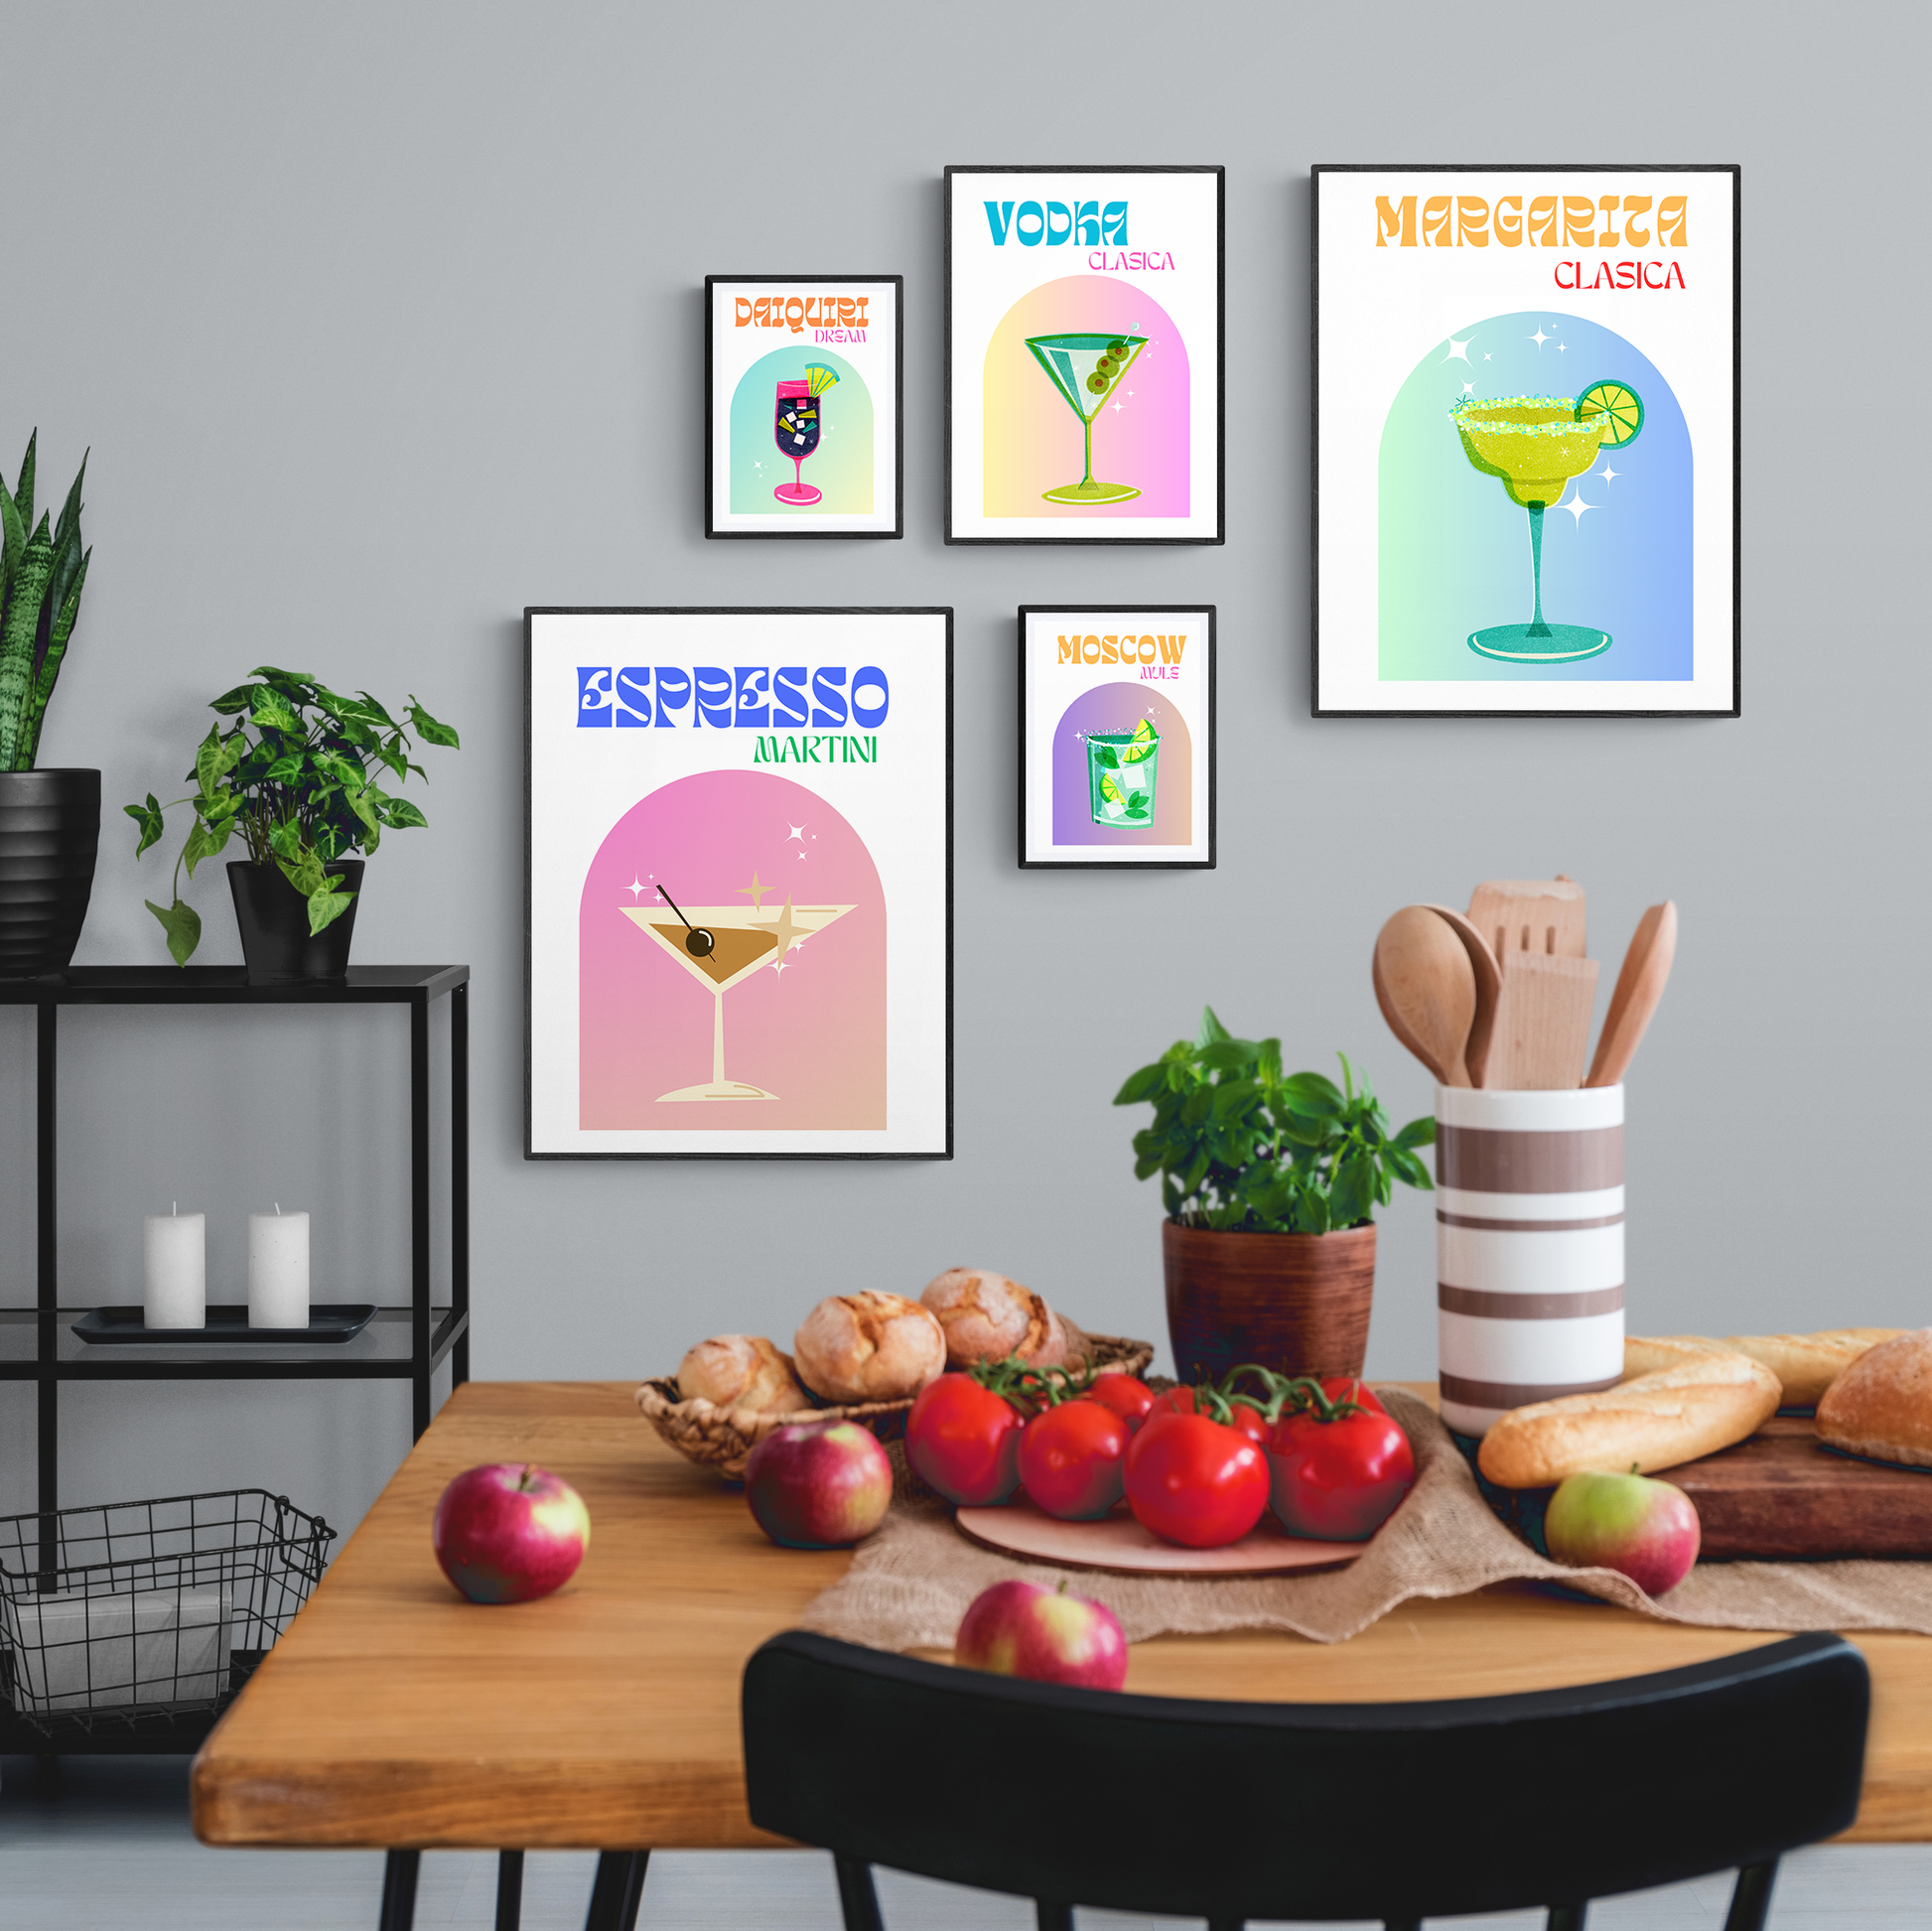 This ESPRESSO COCKTAIL PRINT offers an exciting mix of recipes and popular subjects, from cocktail wall art to flower wall art, kitchen wall art and more. Discover a colorful cocktail illustration by renowned artists, perfect for mixing up a unique Boho Print or Retro Cocktail Poster for your Bar Cart Wall Art. A great gift for cocktail enthusiasts.